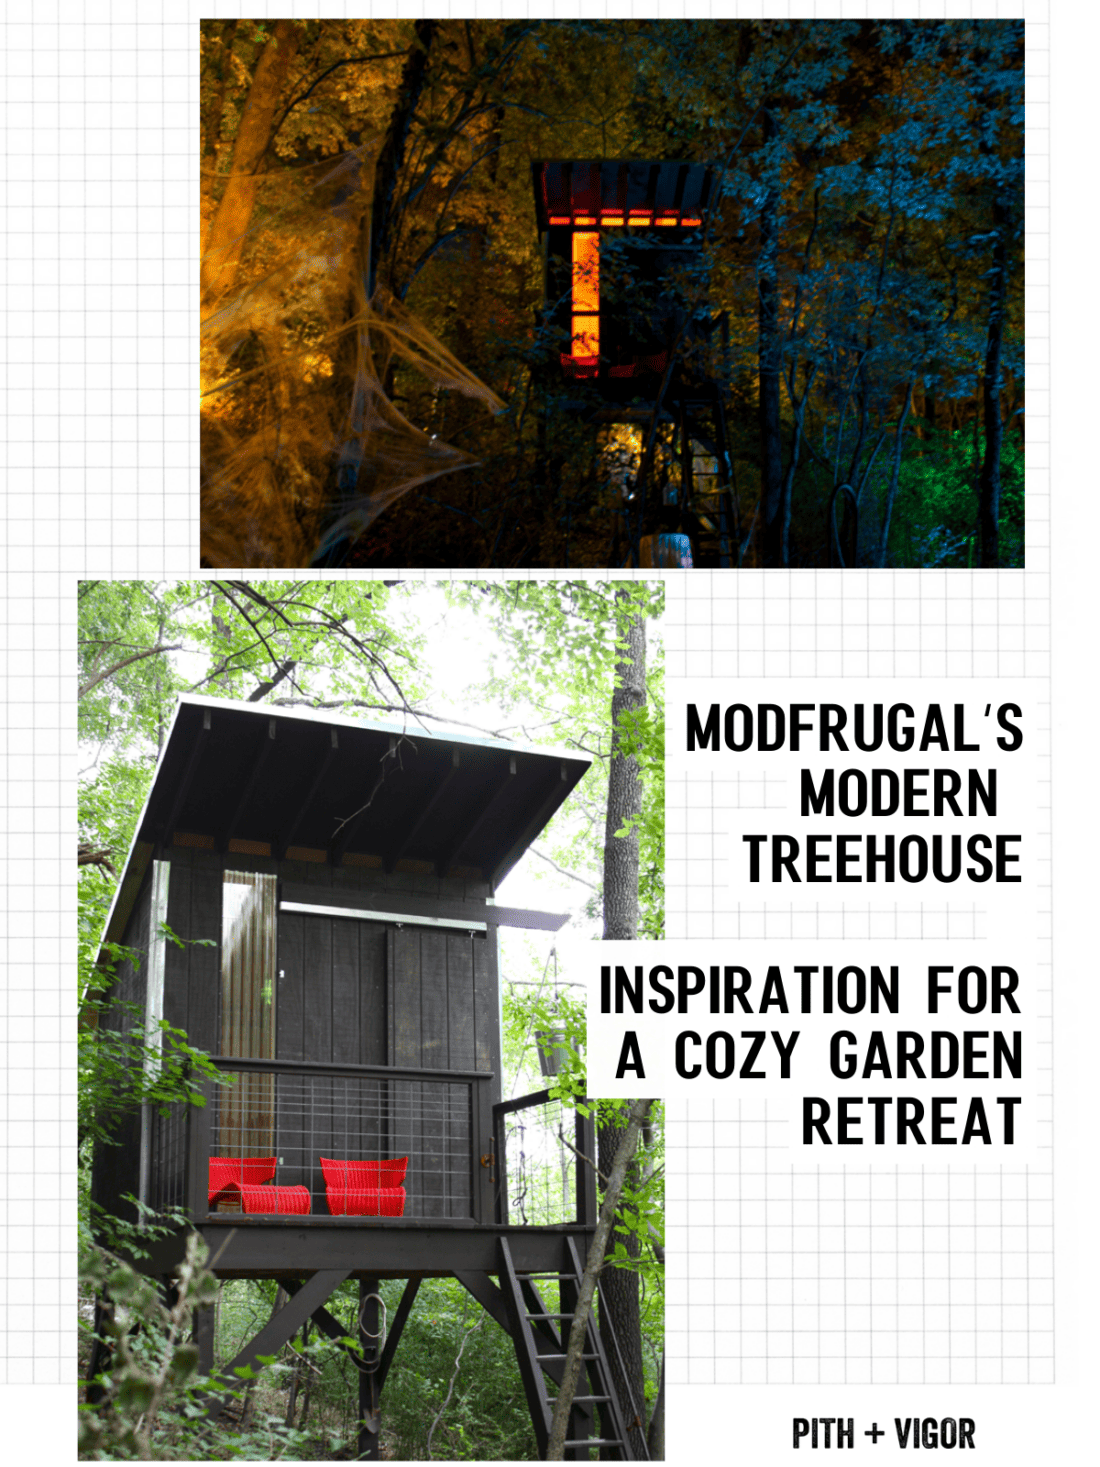 Modern rustic's modern treehouse inspiration for a cozy garden retreat.